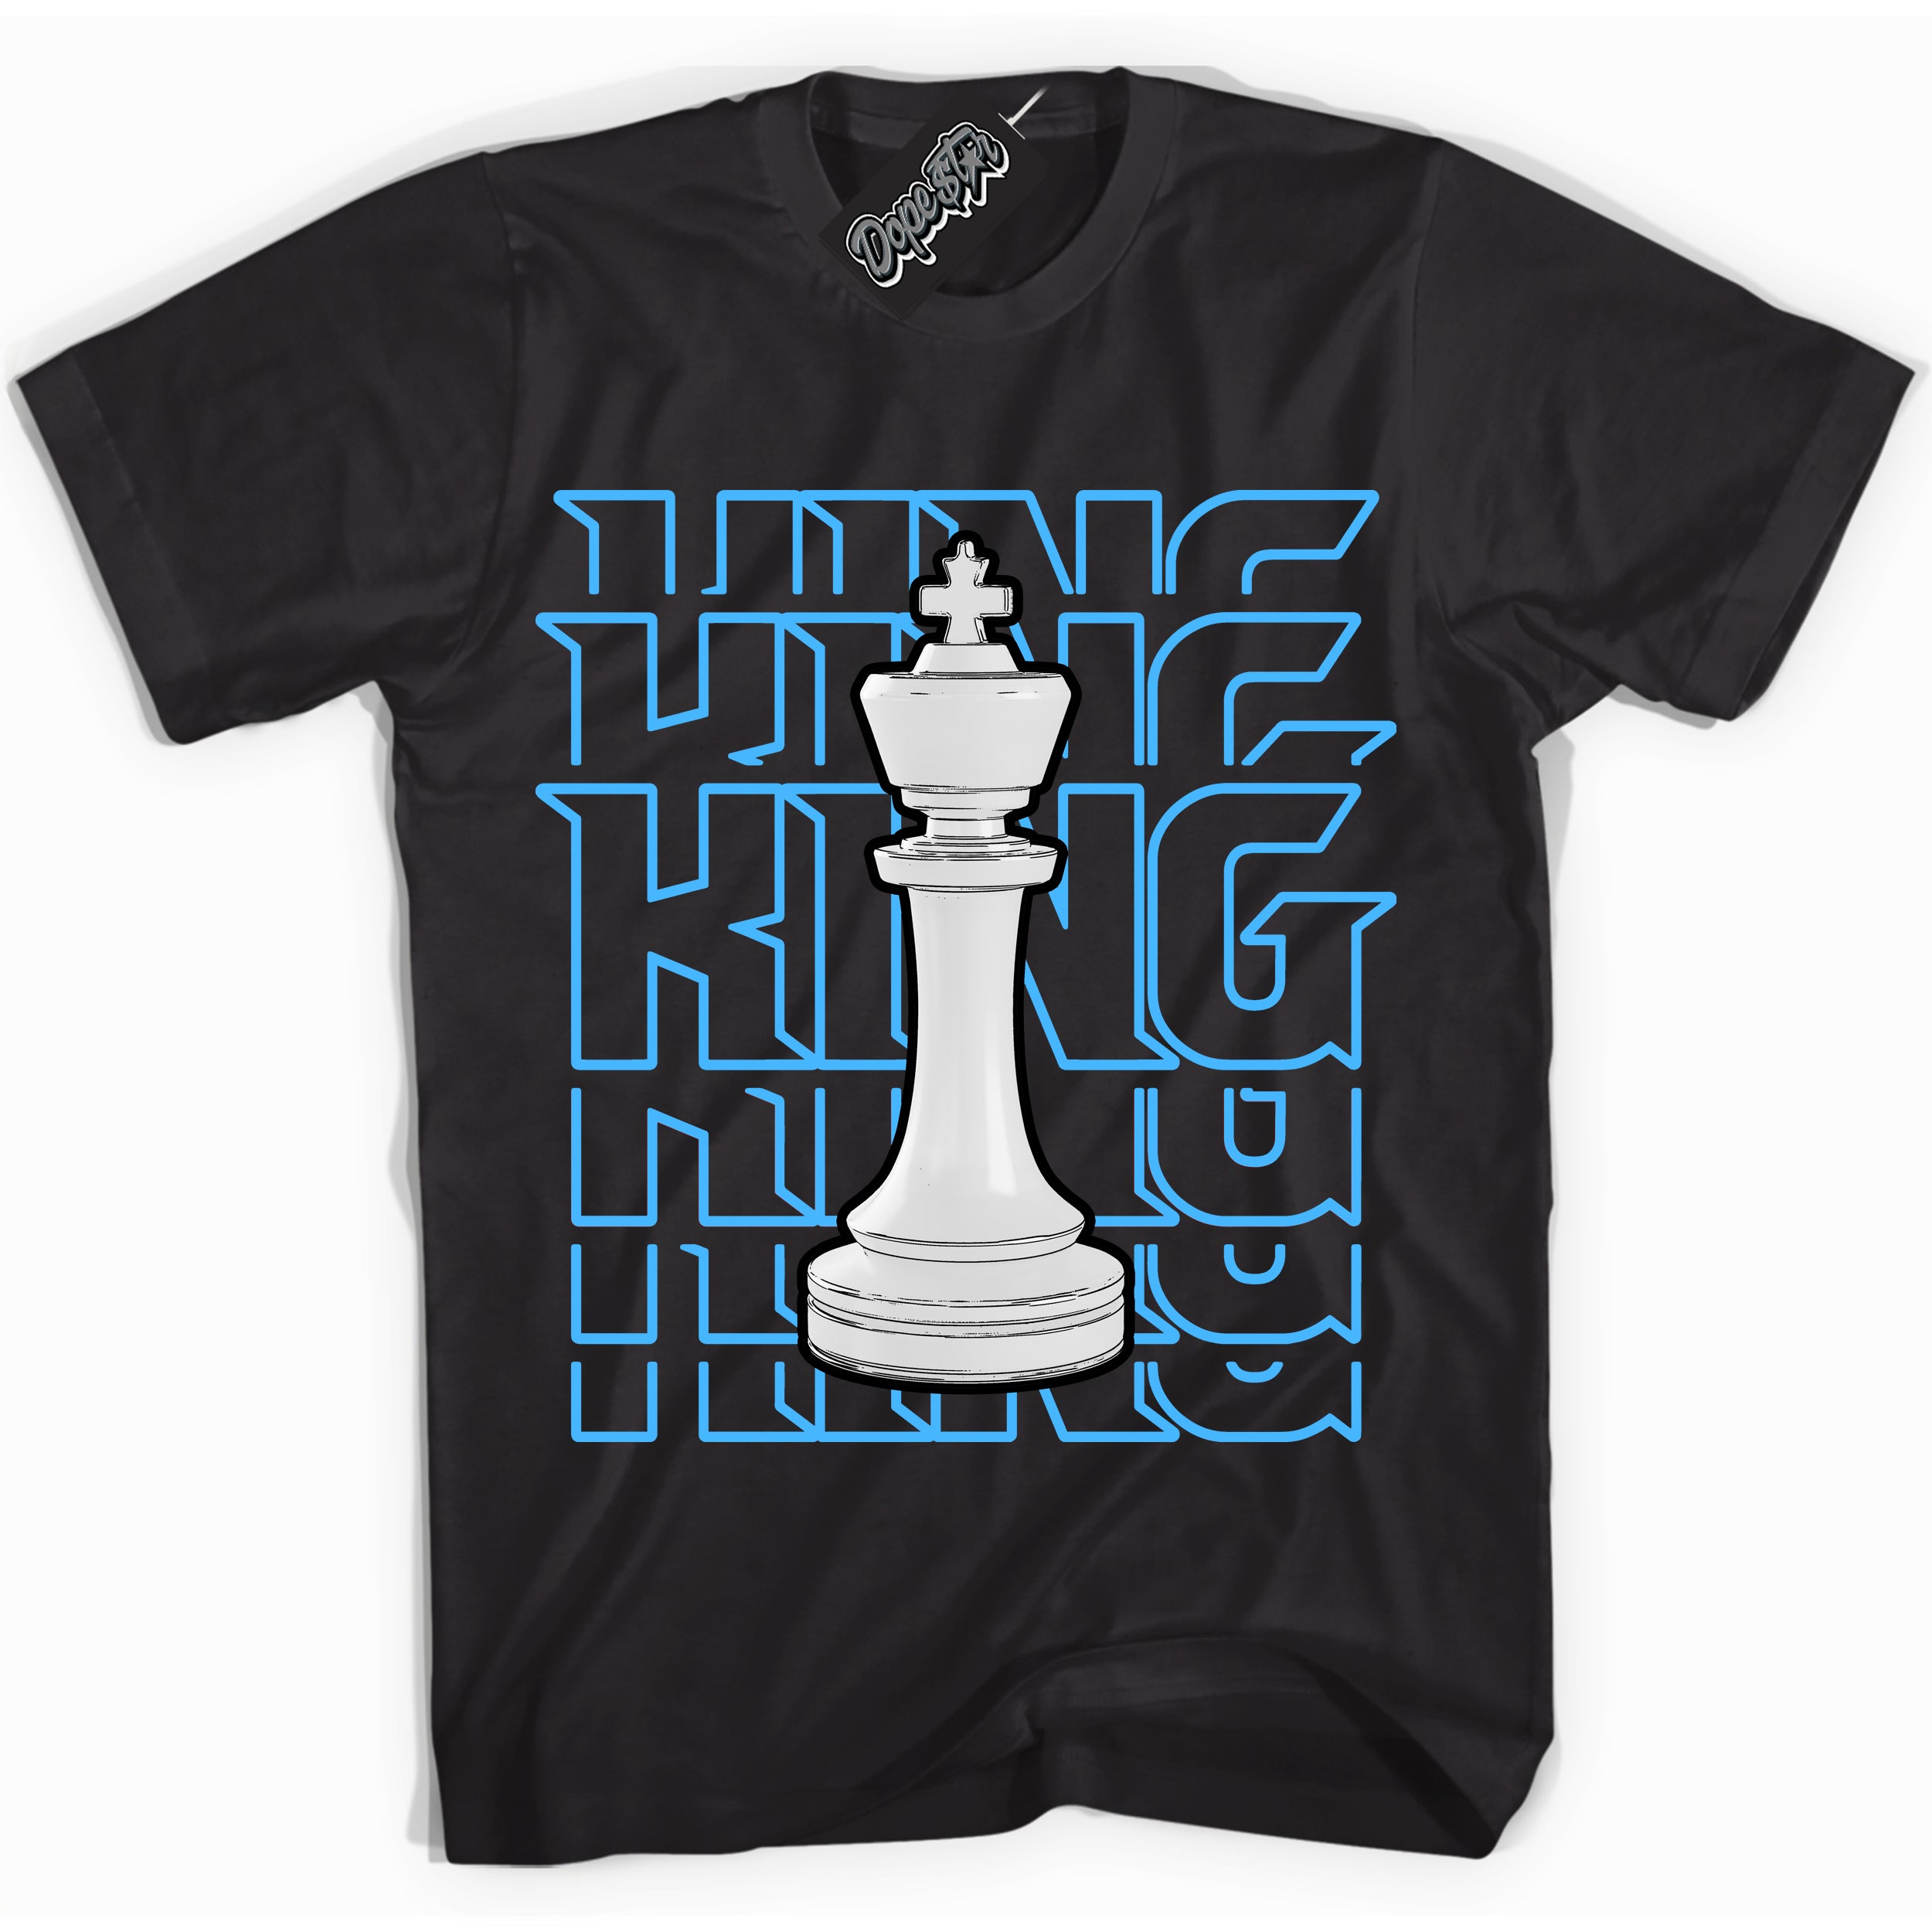 Cool Black graphic tee with “ King Chess ” design, that perfectly matches Powder Blue 9s sneakers 